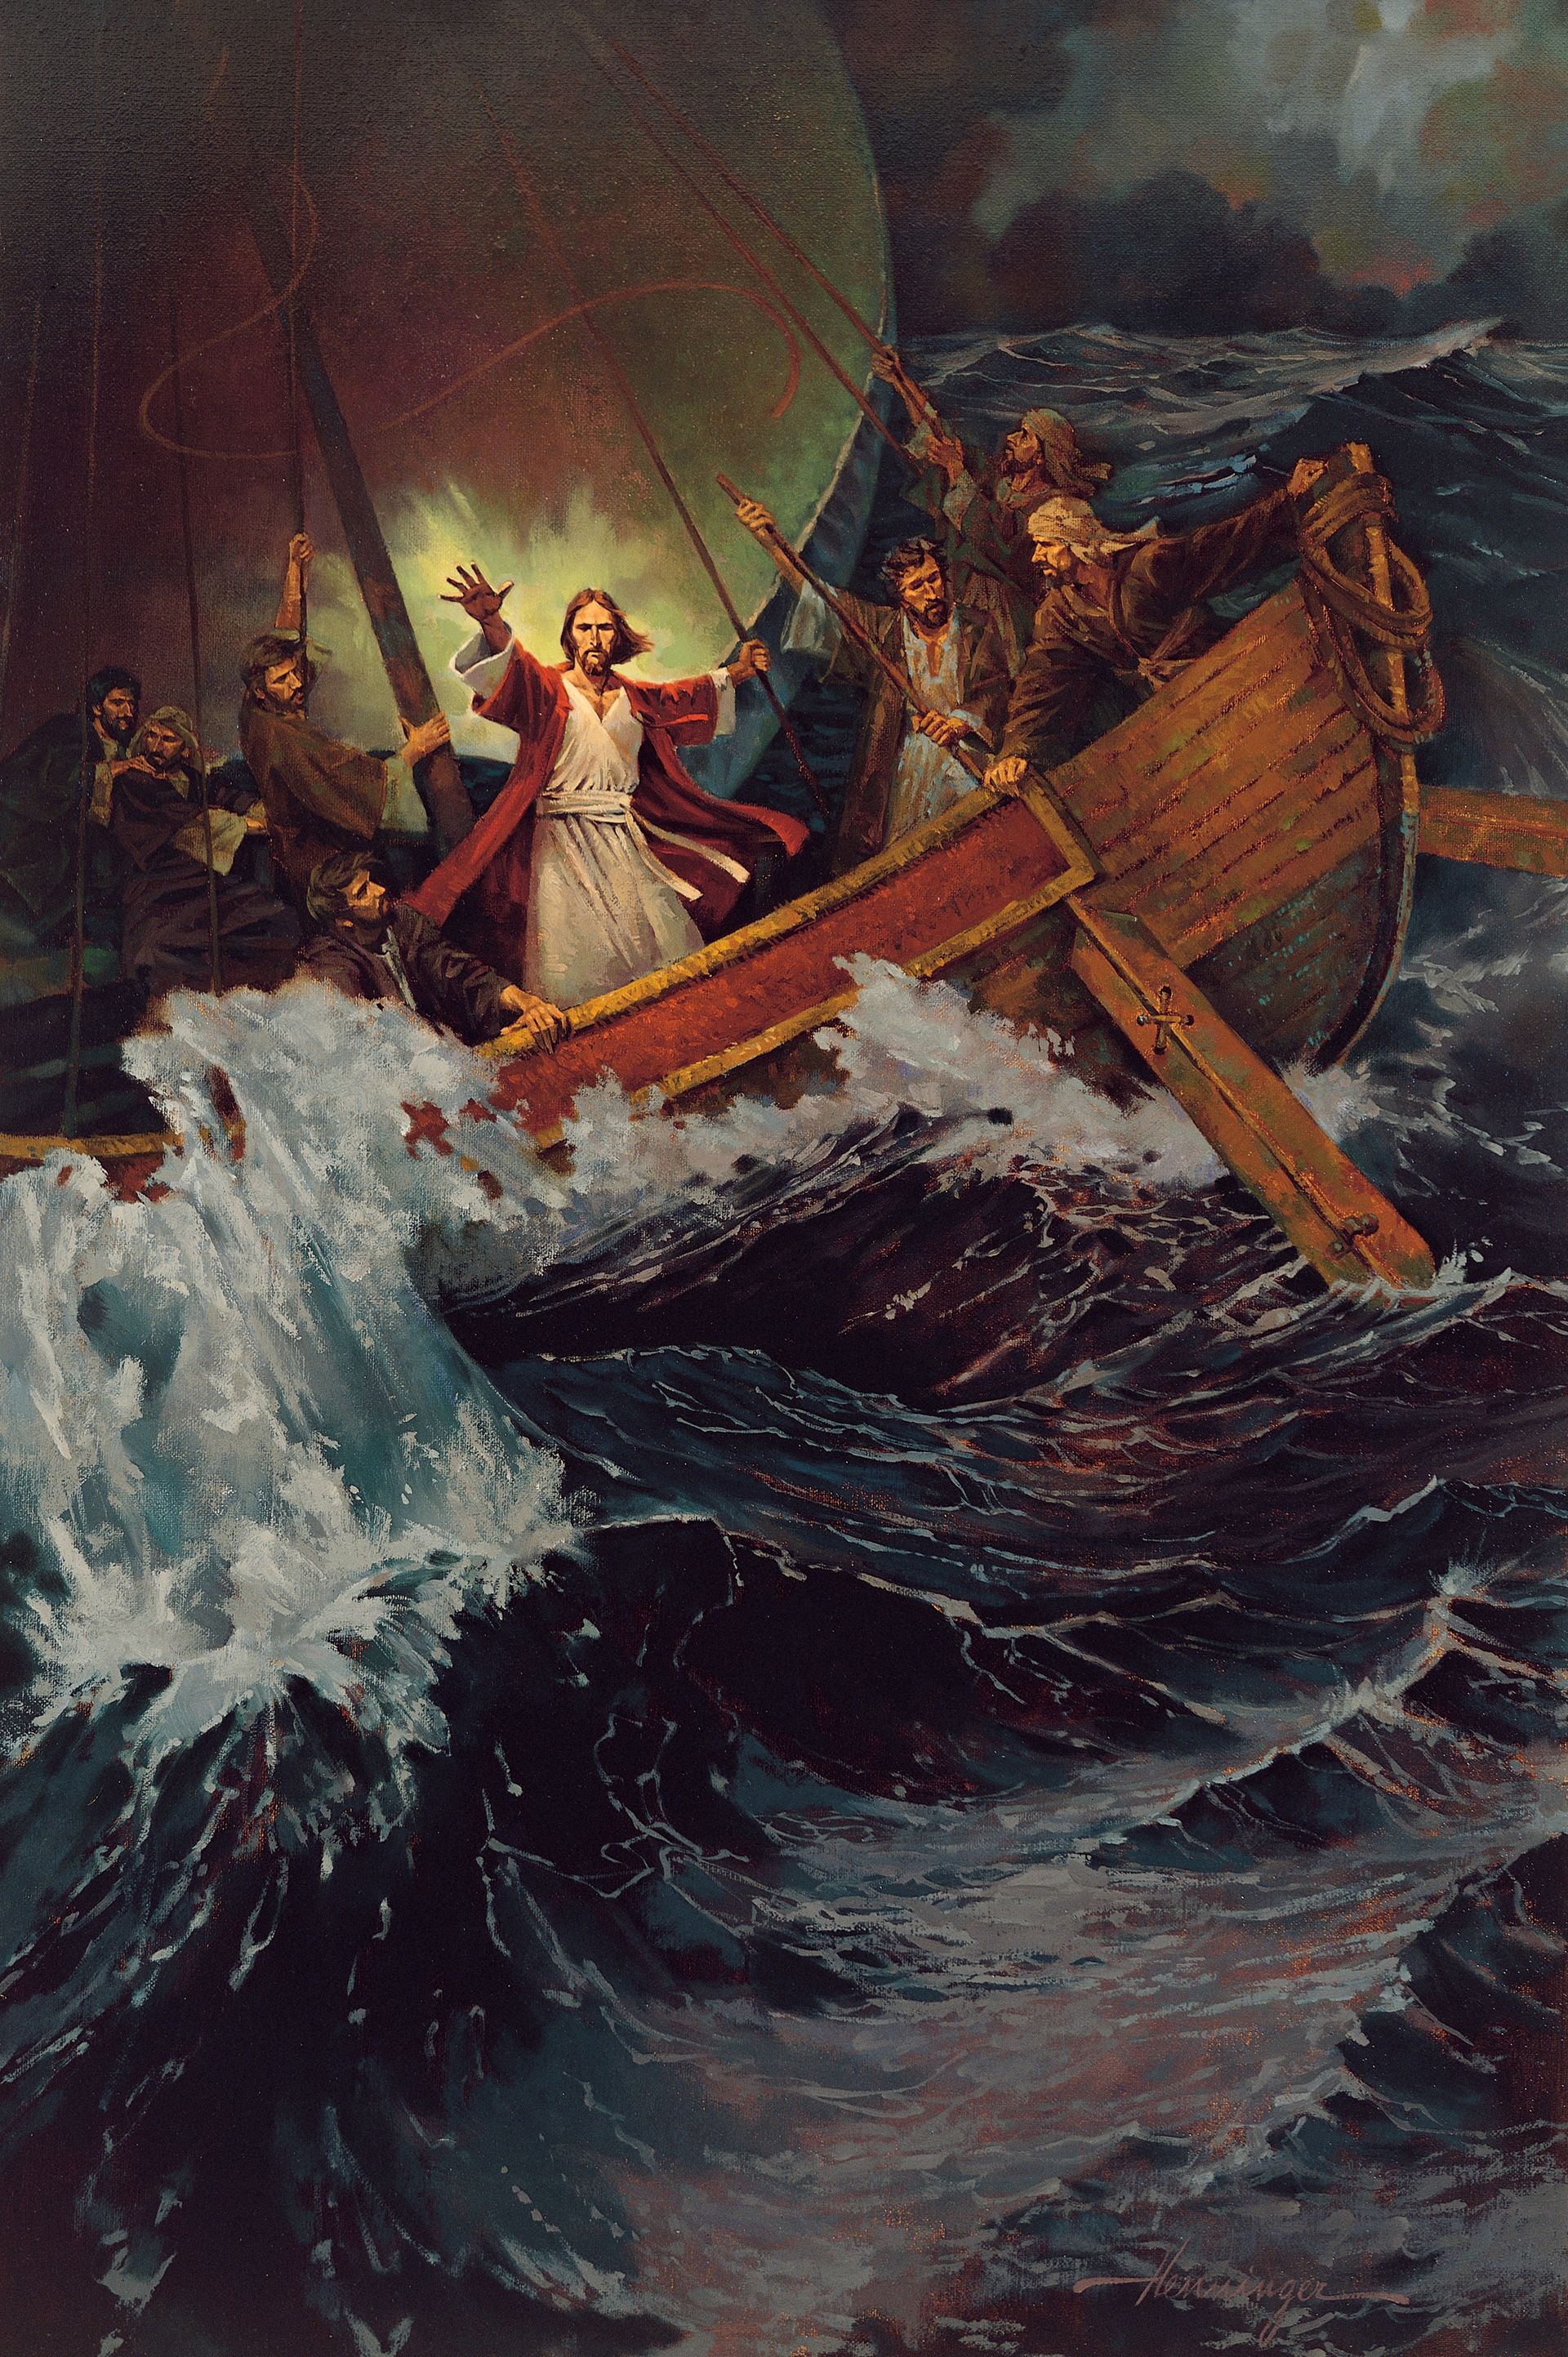 Stilling the Storm, by Ted Henninger (62139); GAK 214; Primary manual 2-28; Primary manual 7-15; Matthew 8:23–27; Mark 4:36–41; Luke 8:22–25